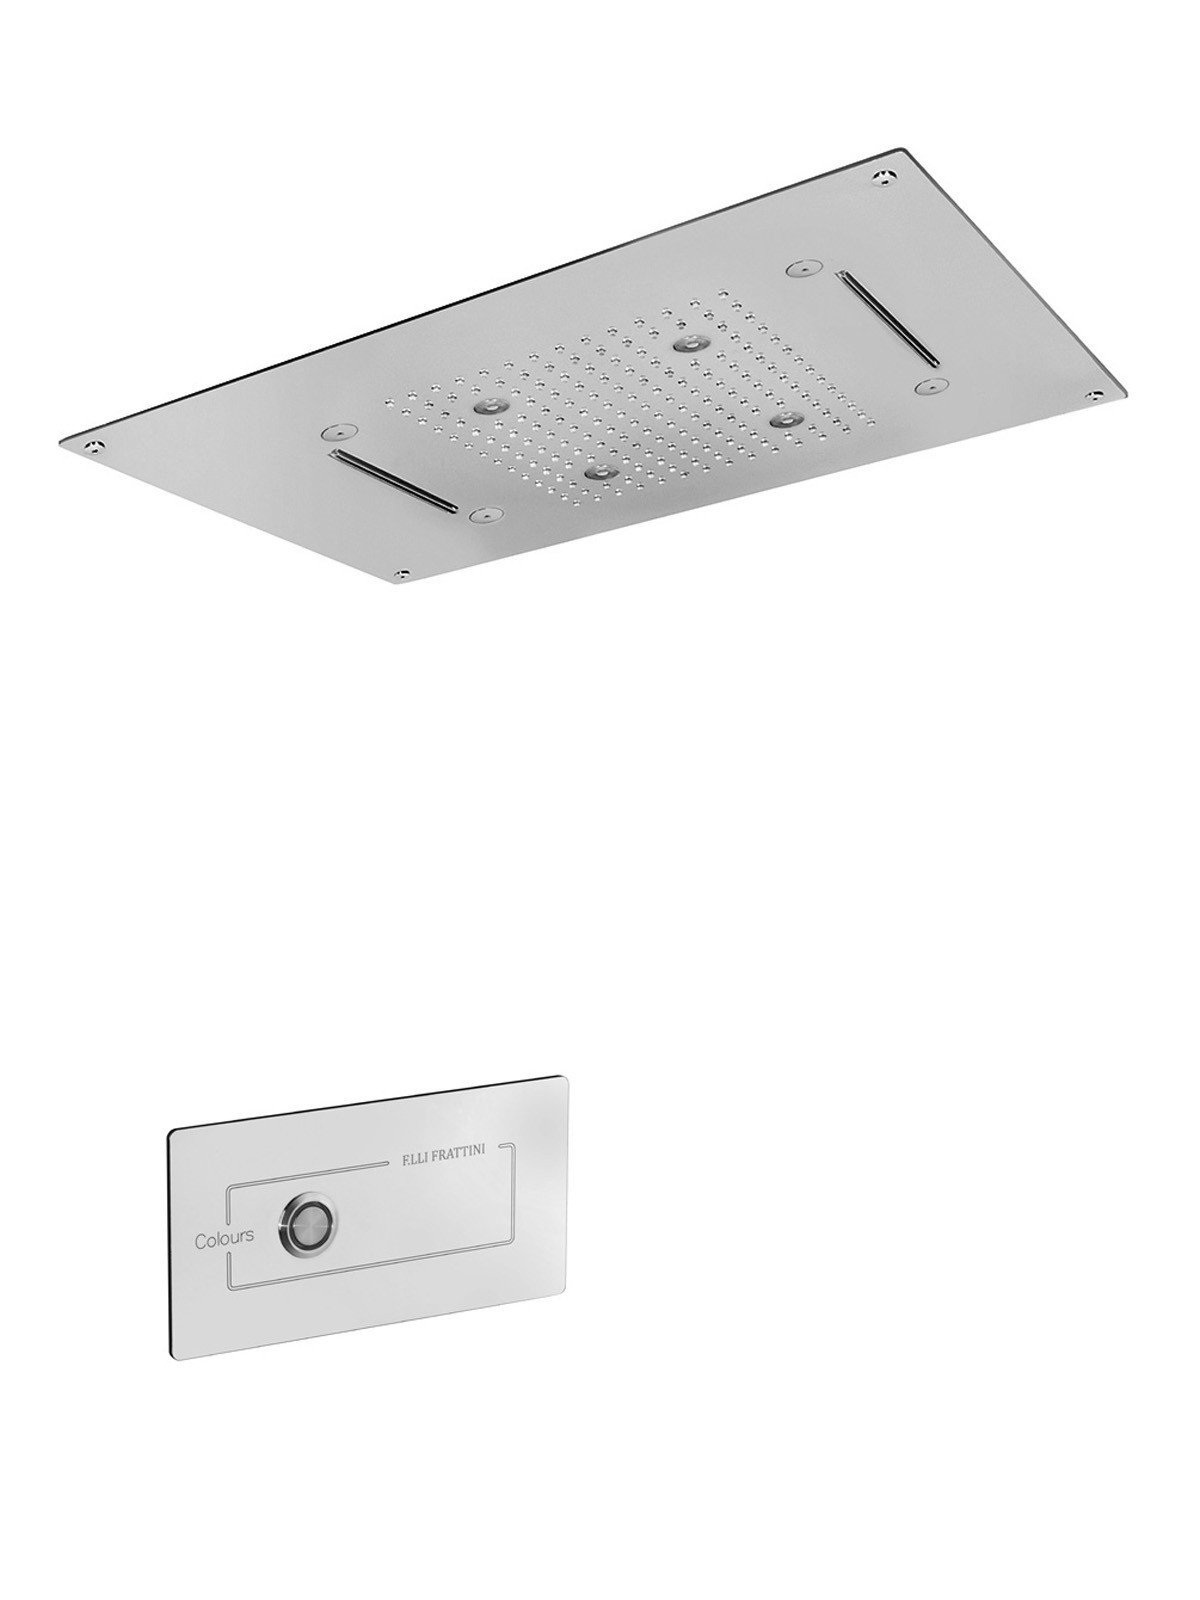 Stainless steel anticalcareous ceiling mounted shower 3 function